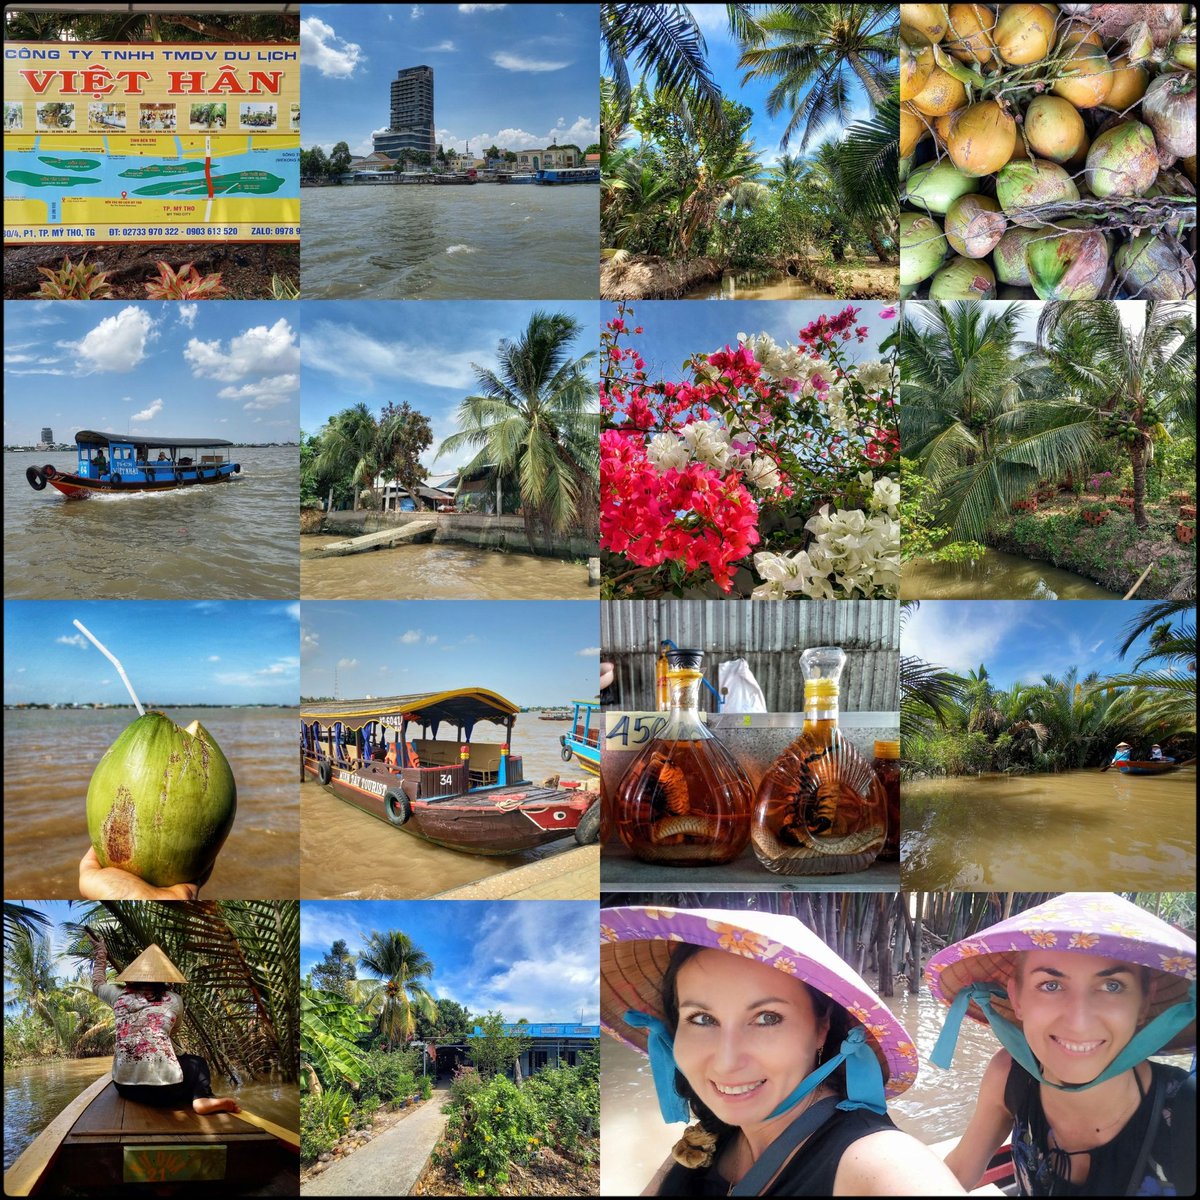 #goodmorning & have a nice day 😊 #VietnamAdventure - 13 - #MekongDelta A brown river, green palm trees, sampans, non la hats, a variety of fruits and the smell of coconut candies ➡️ a day in the Mekong Delta 🤩 And #SongOfTheDay is youtu.be/fV6a8nZE4cg?si… #Travel #AsiaTrip